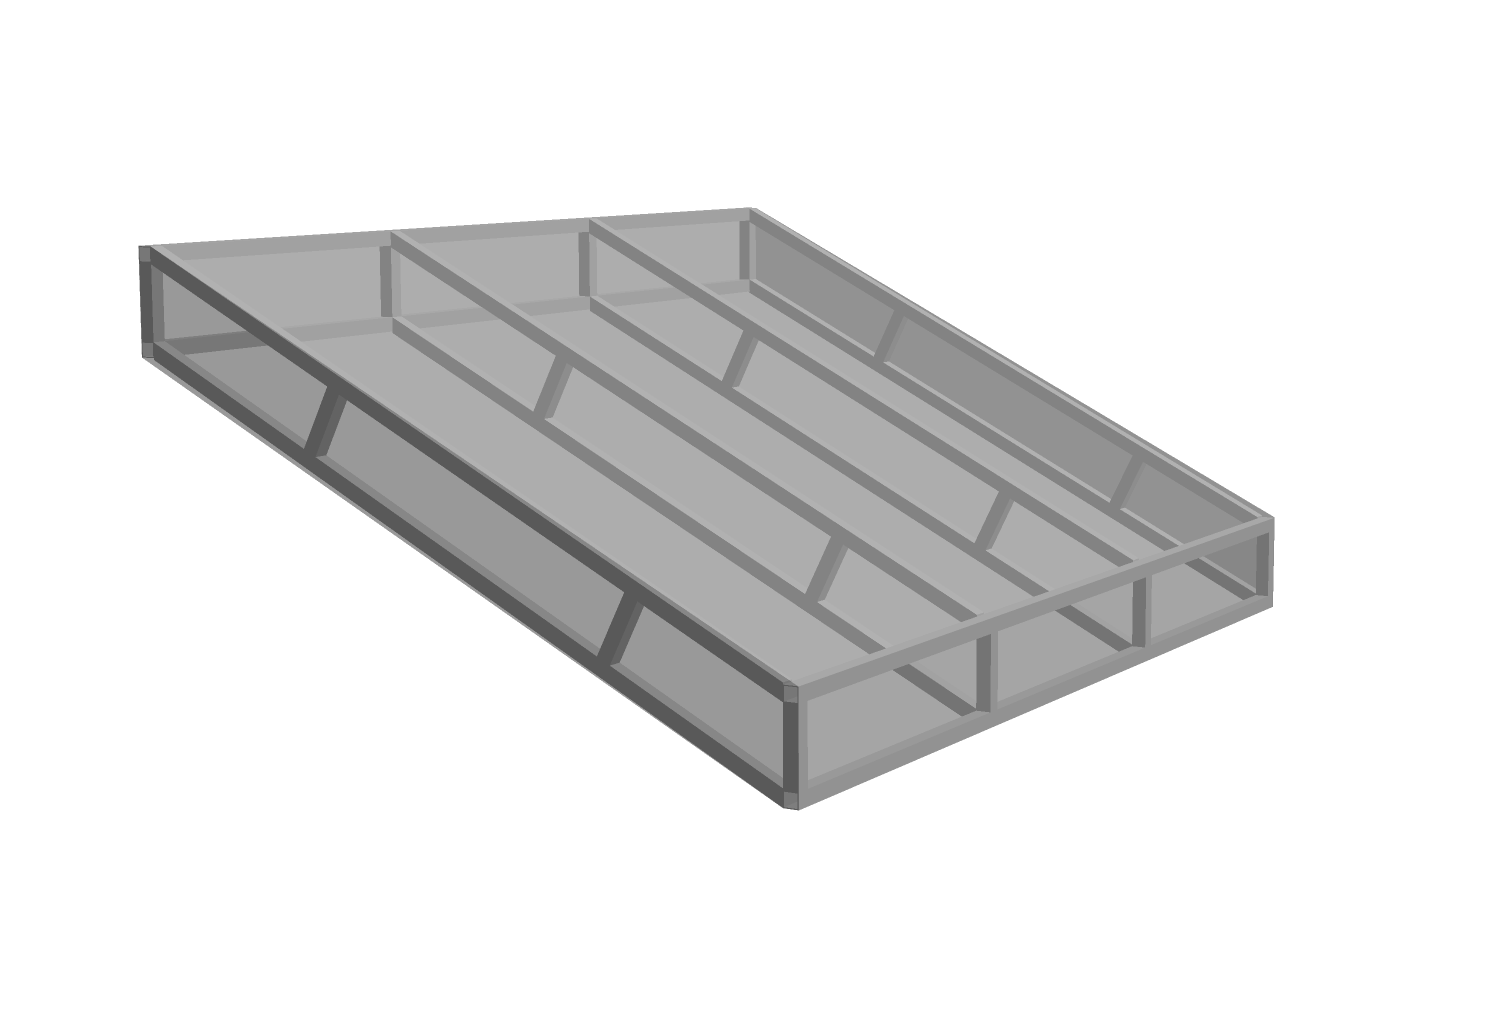 3D model of a traditional roof awning